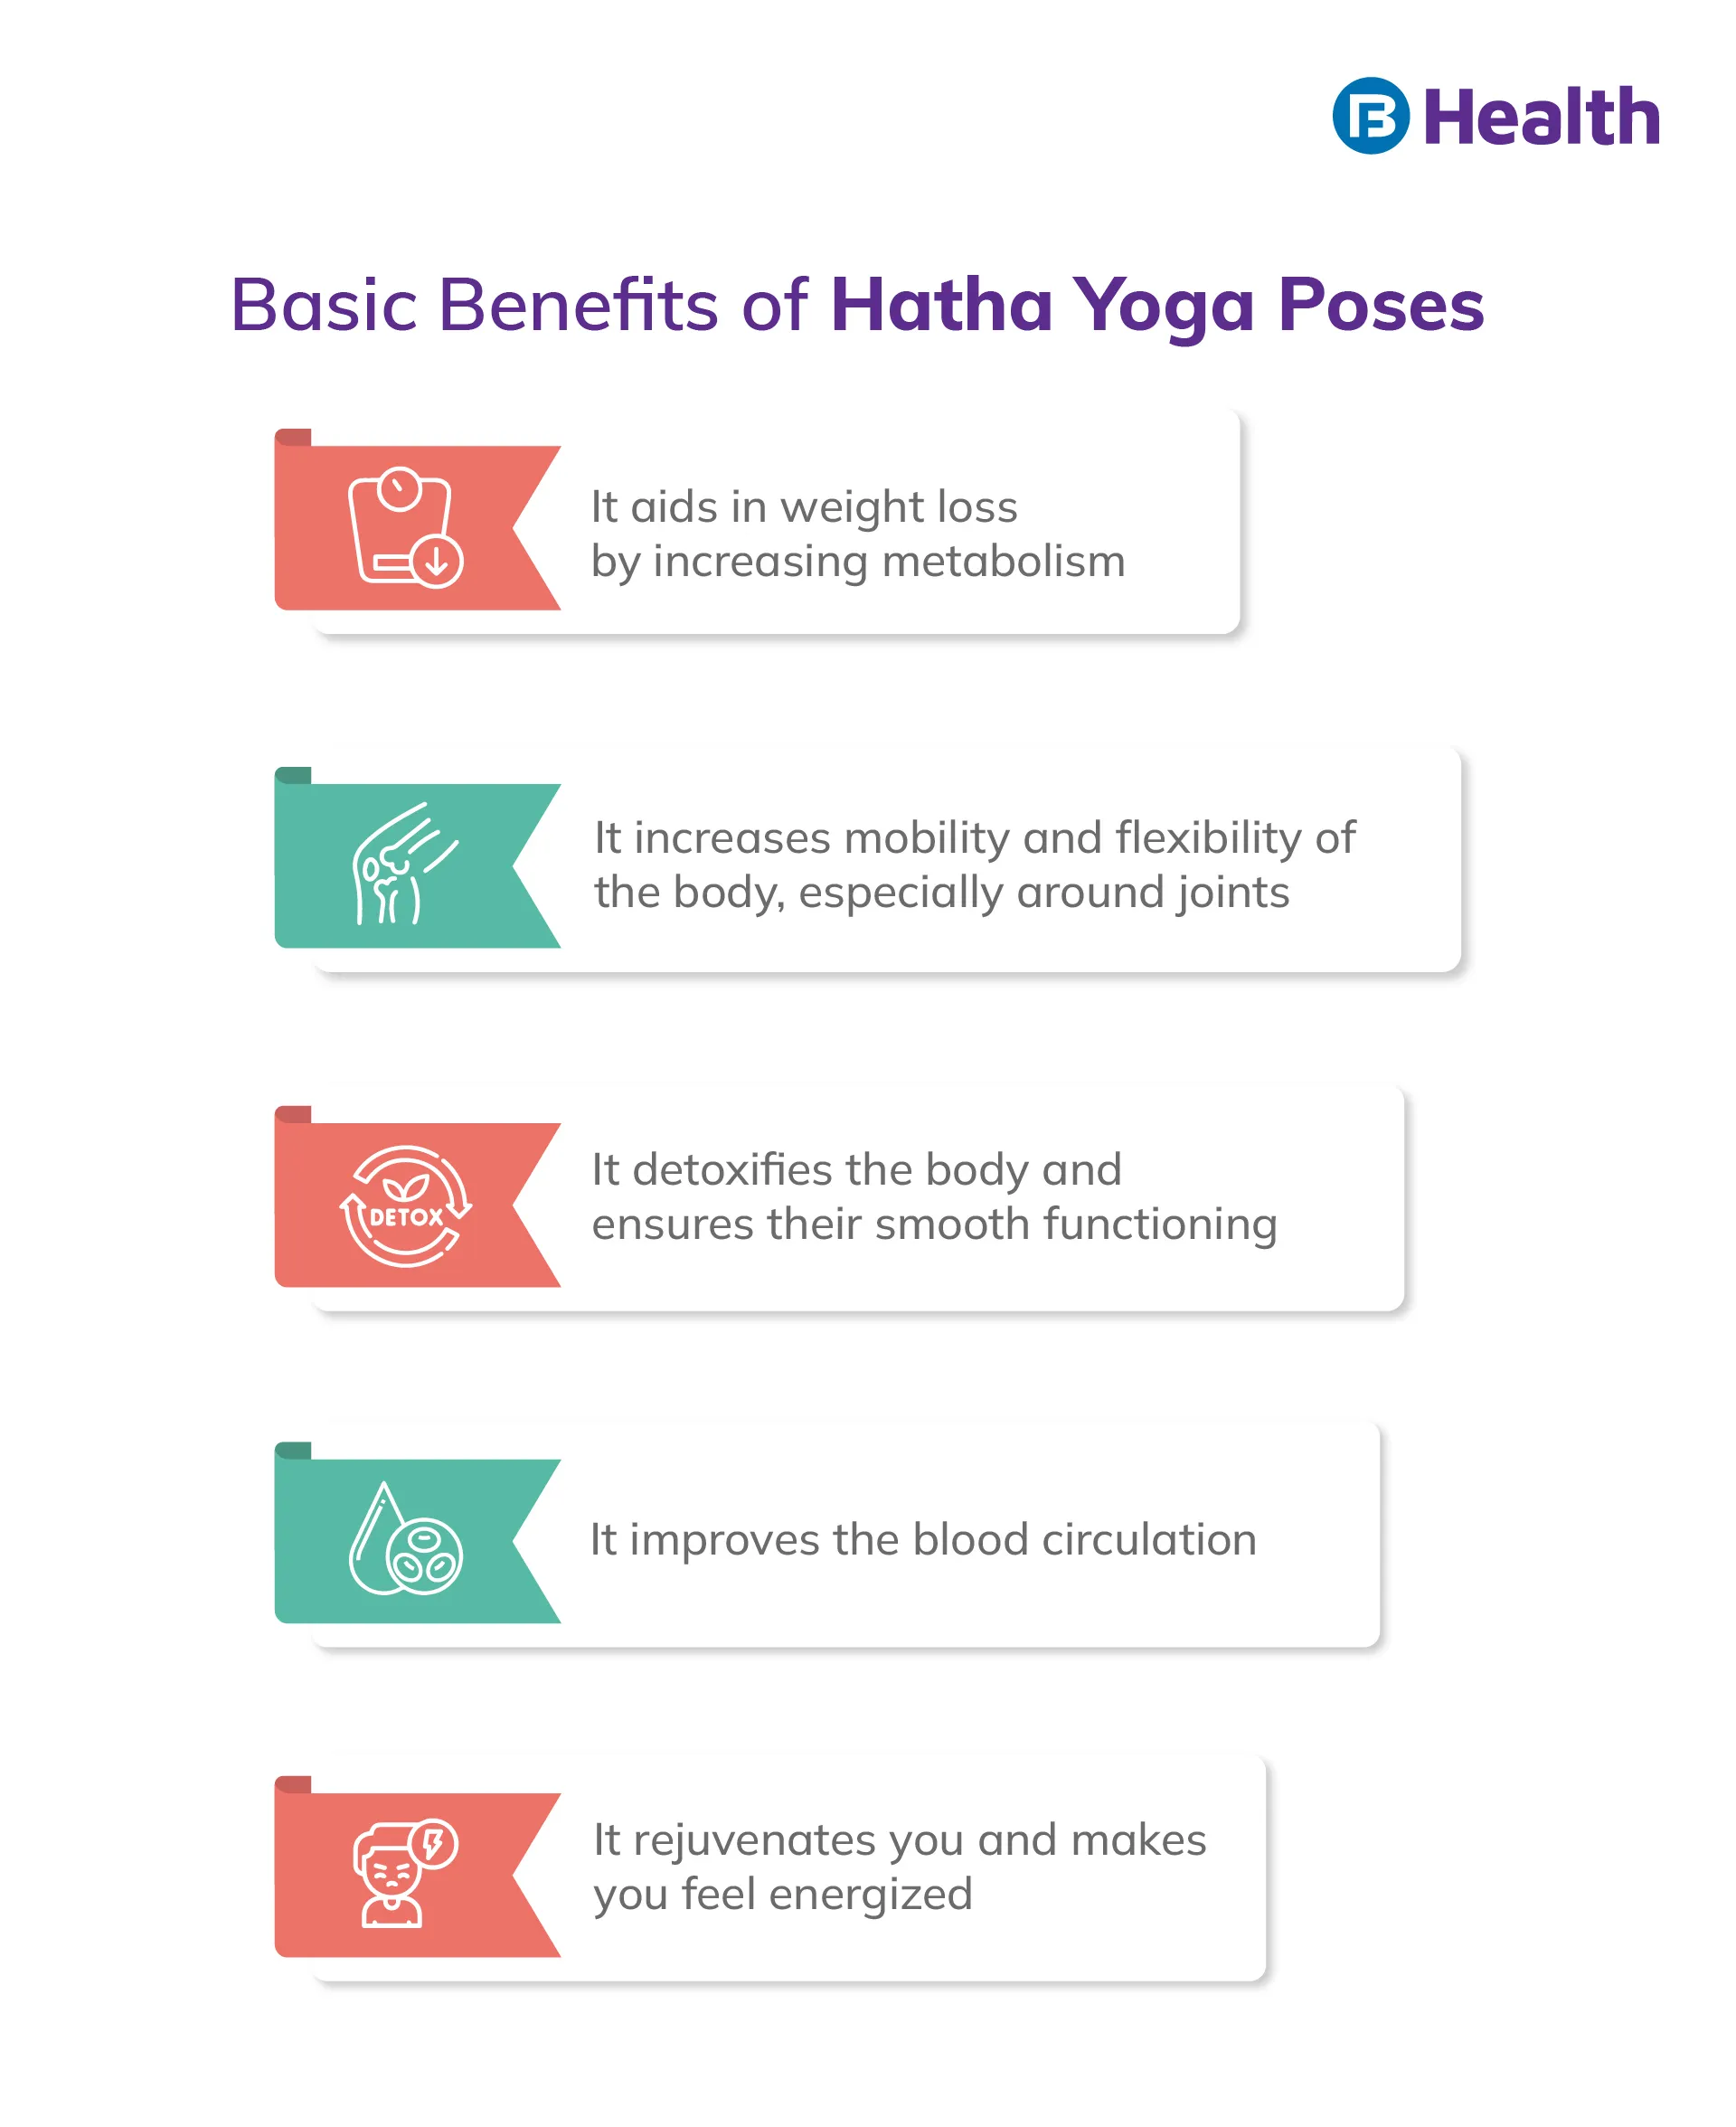 Your How-To Guides on Hatha Yoga Poses for Beginners